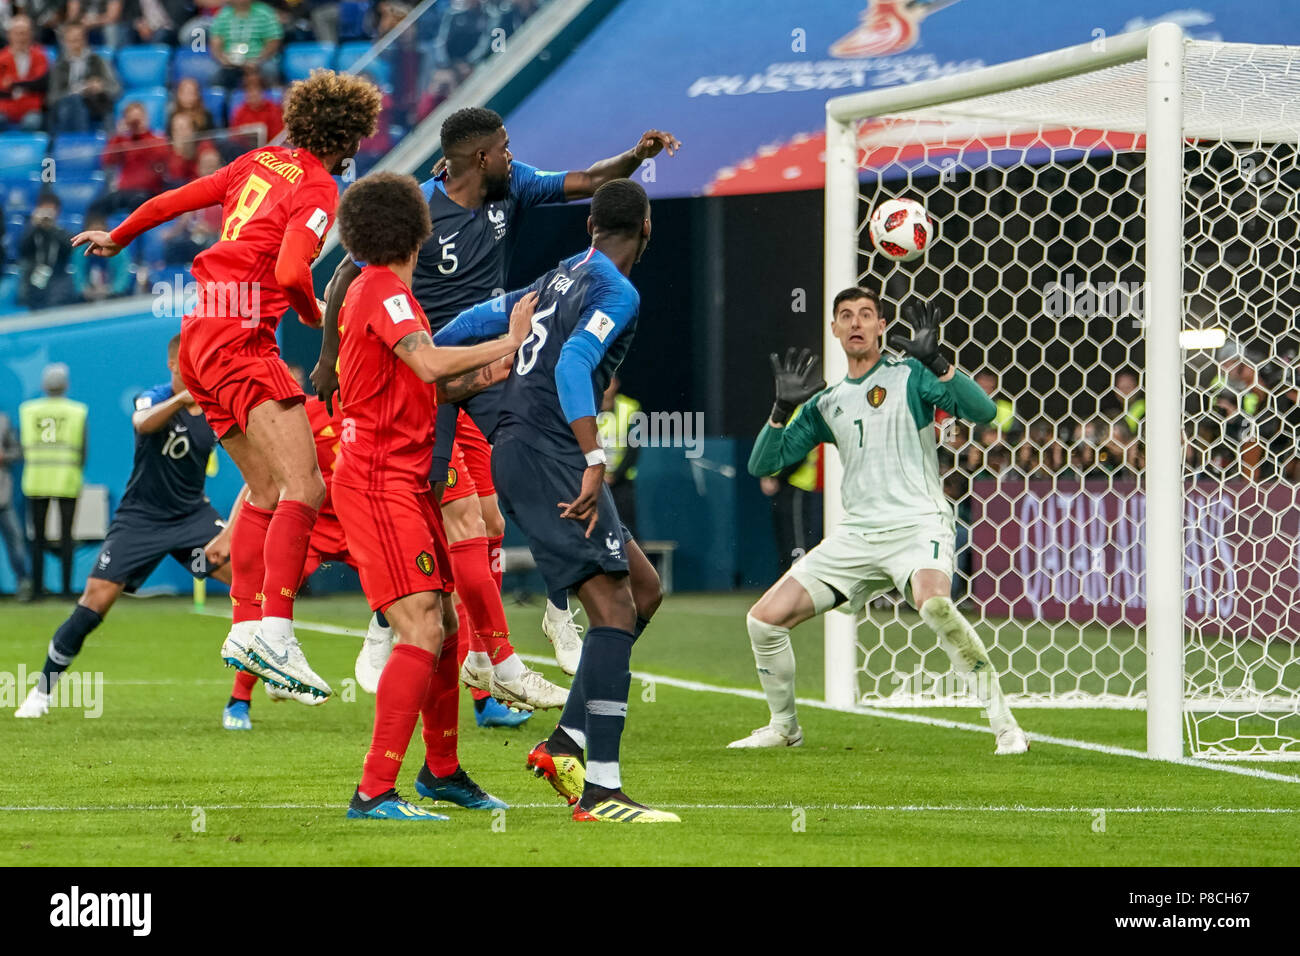 St. 10th July, 2018. Samuel Umtiti of France scoring to 1-0 in the 51rd minute at St. Petersbourg Stadium during the semi finals between France and Belgium during the 2018 World Cup. Ulrik Pedersen/CSM/Alamy Live News Stock Photo